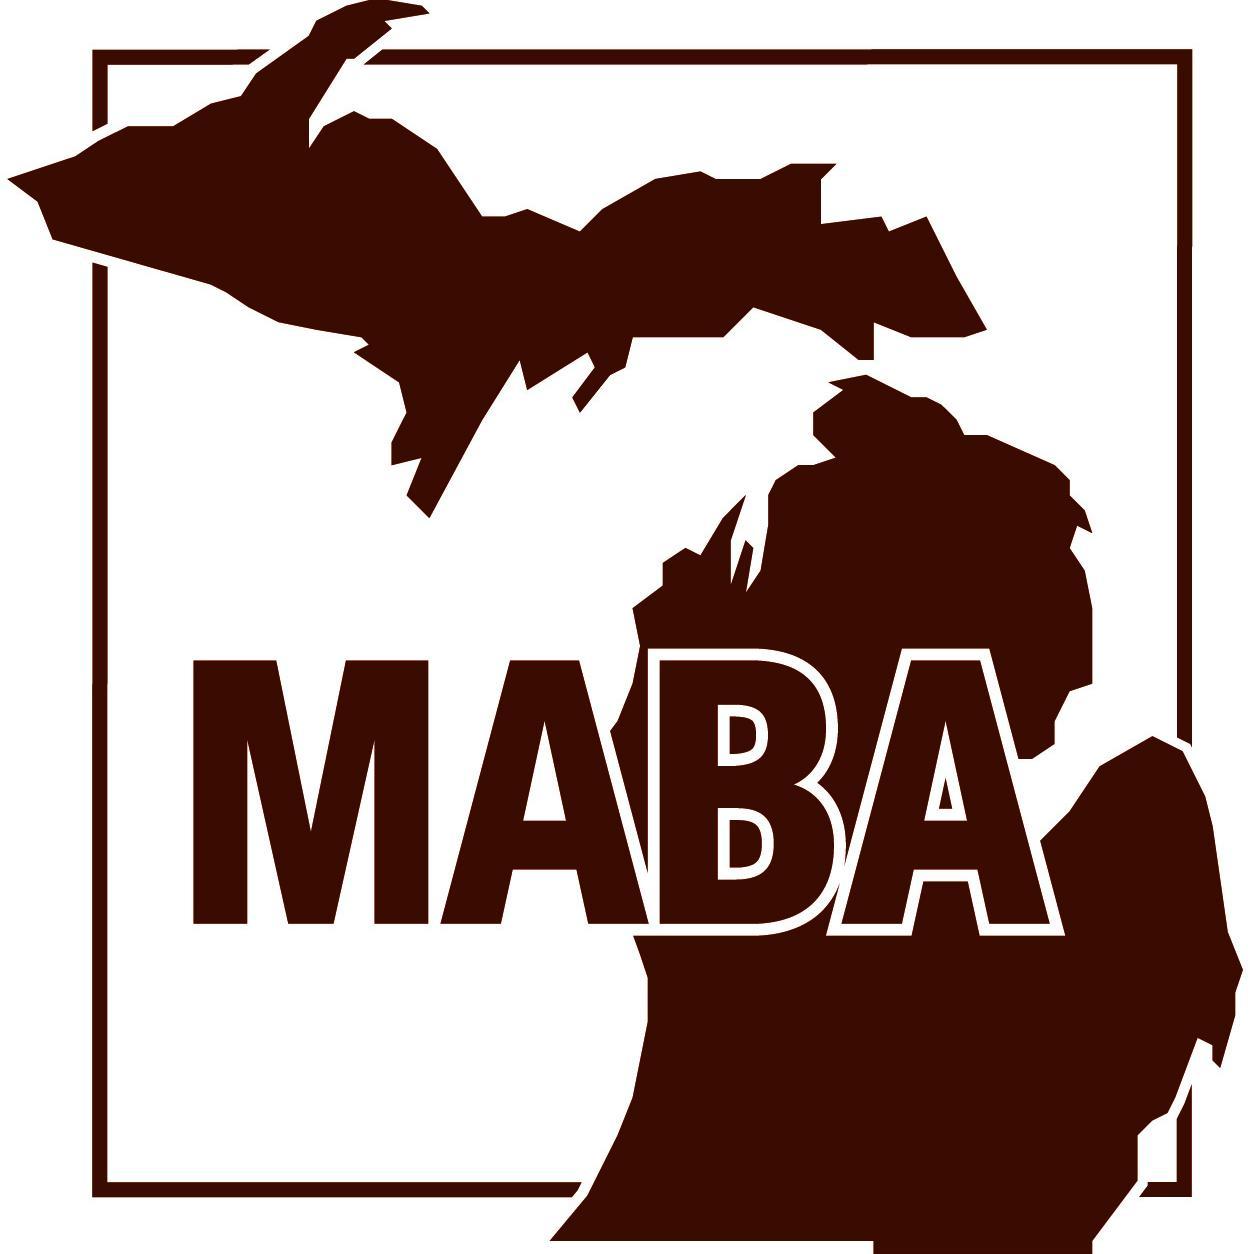 For the latest from the Michigan Agri-Business Association, visit our website or the pages listed below.